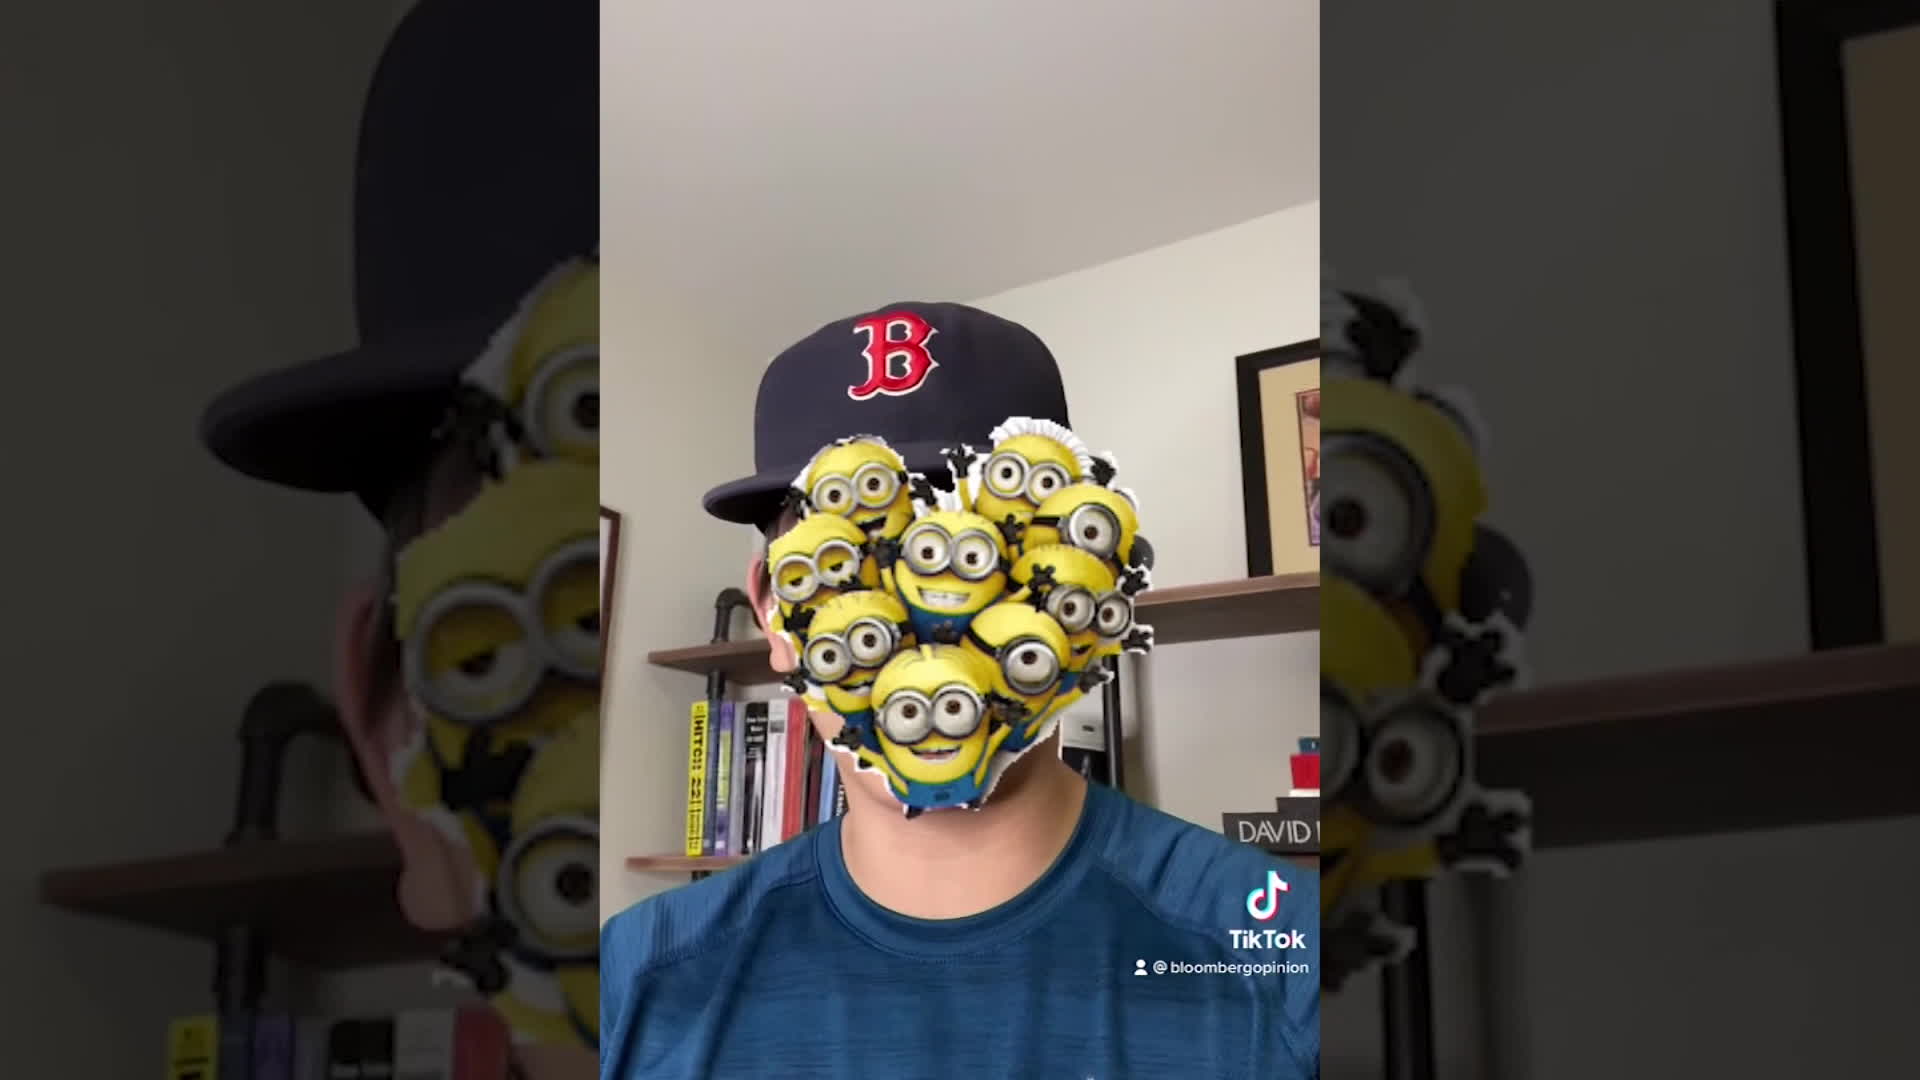 Ridiculous Minions: Rise of Gru meme is taking TikTok by storm